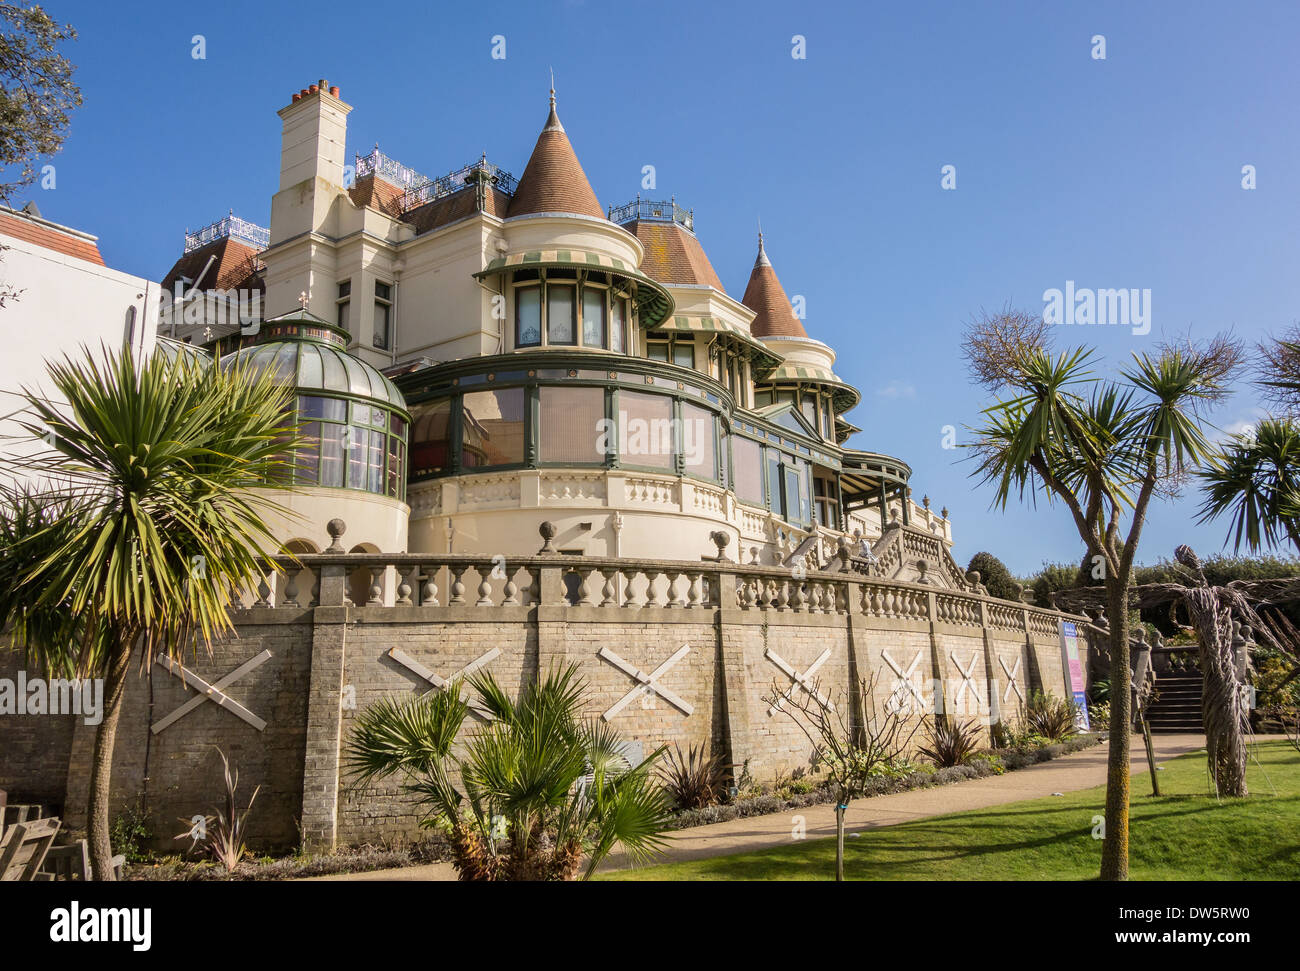 Russell-Cotes Art Gallery & Museum, Bournemouth, Dorset. England, UK. Stock Photo